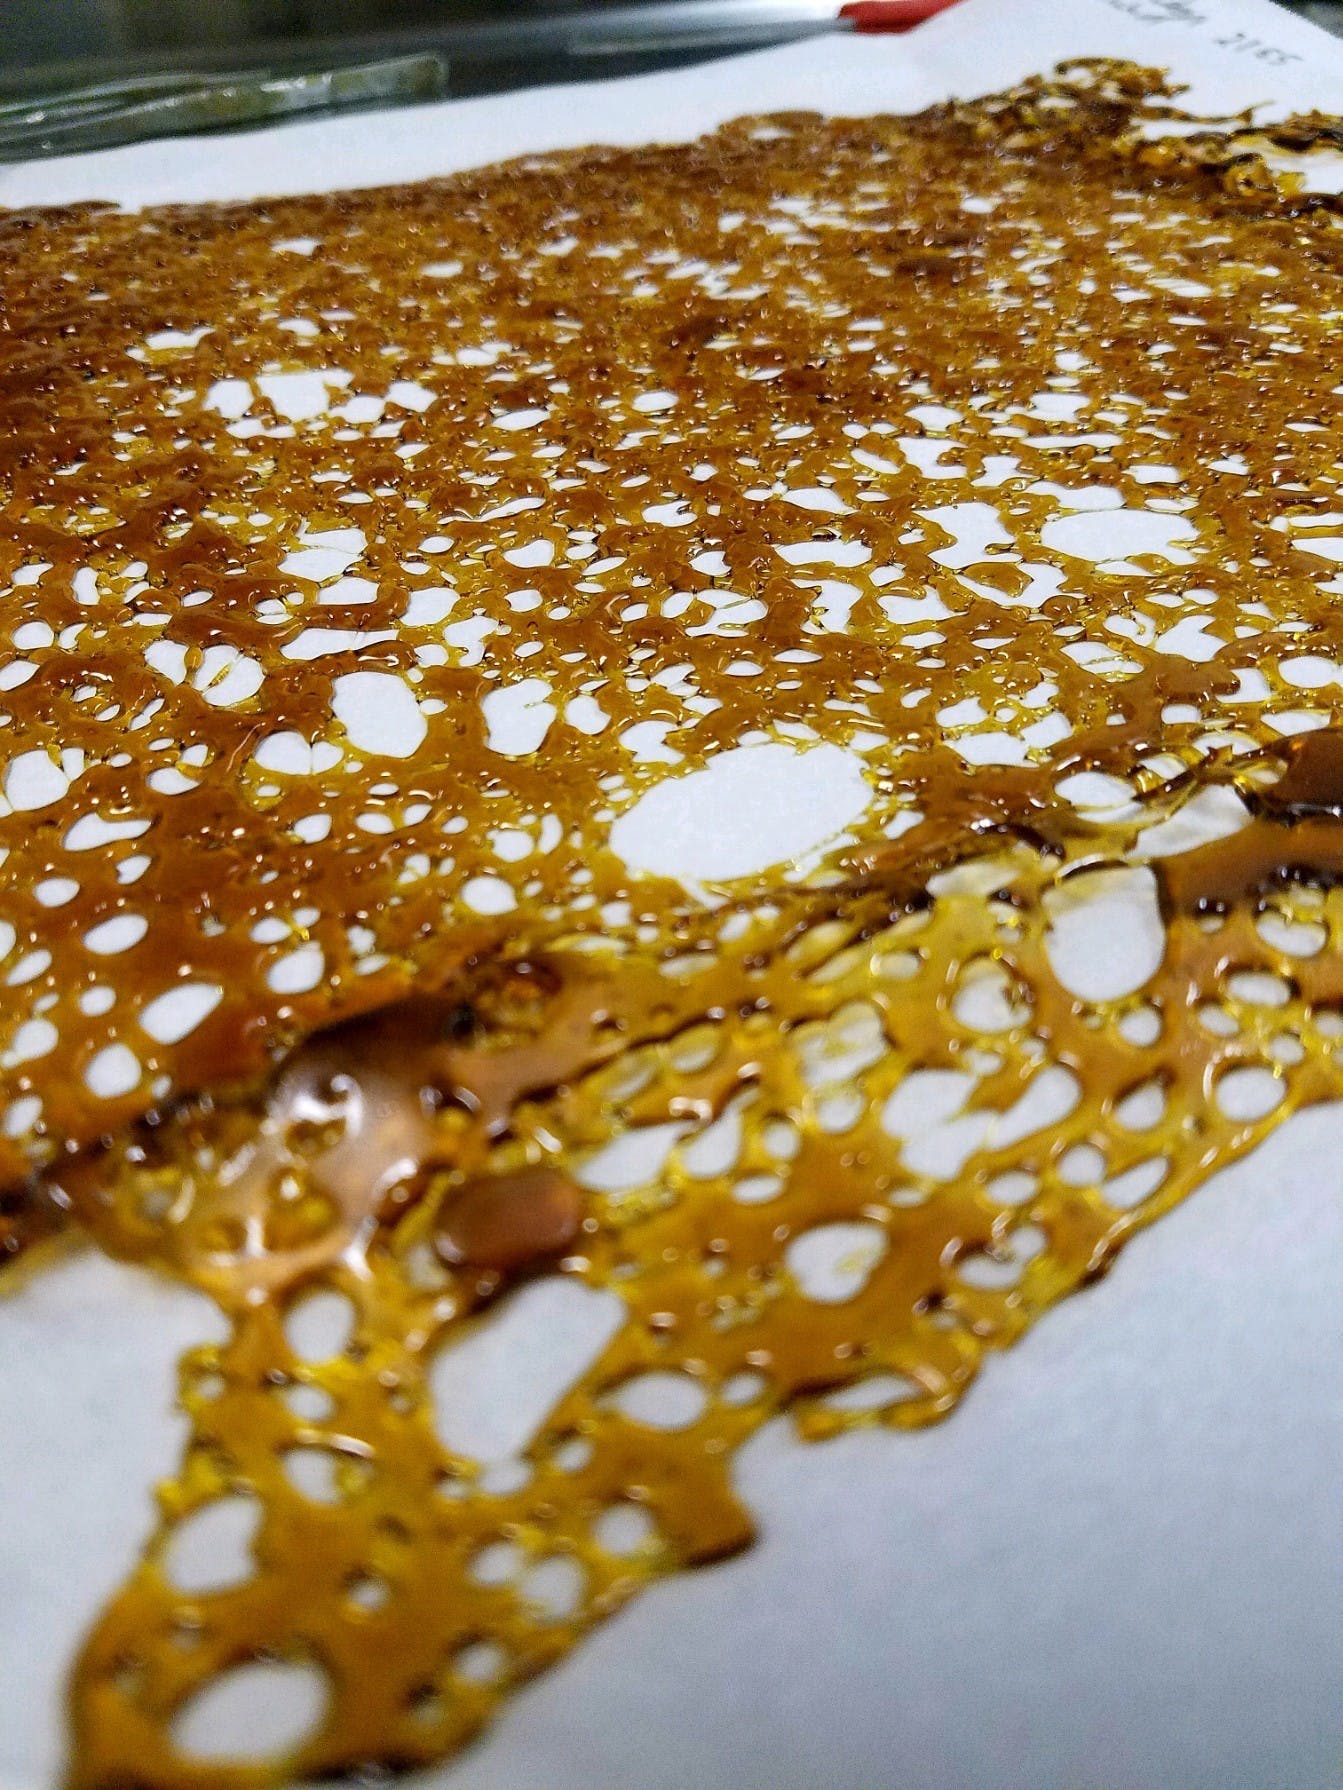 wax-sweet-science-shatter-tier-2-white-cheese